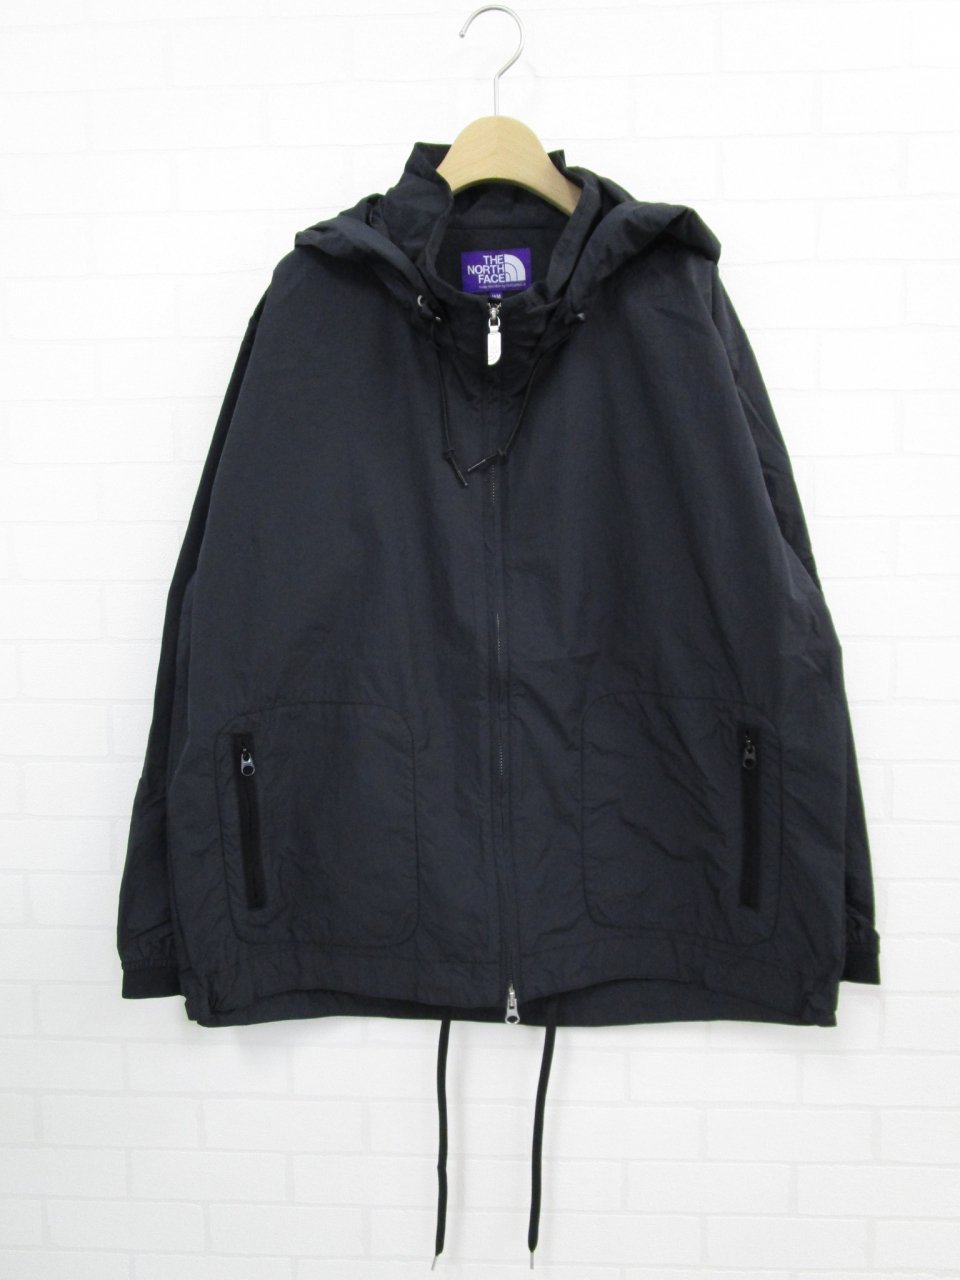 THE NORTH FACE - マウンテンウィンドパーカー - Sheth Online Store 